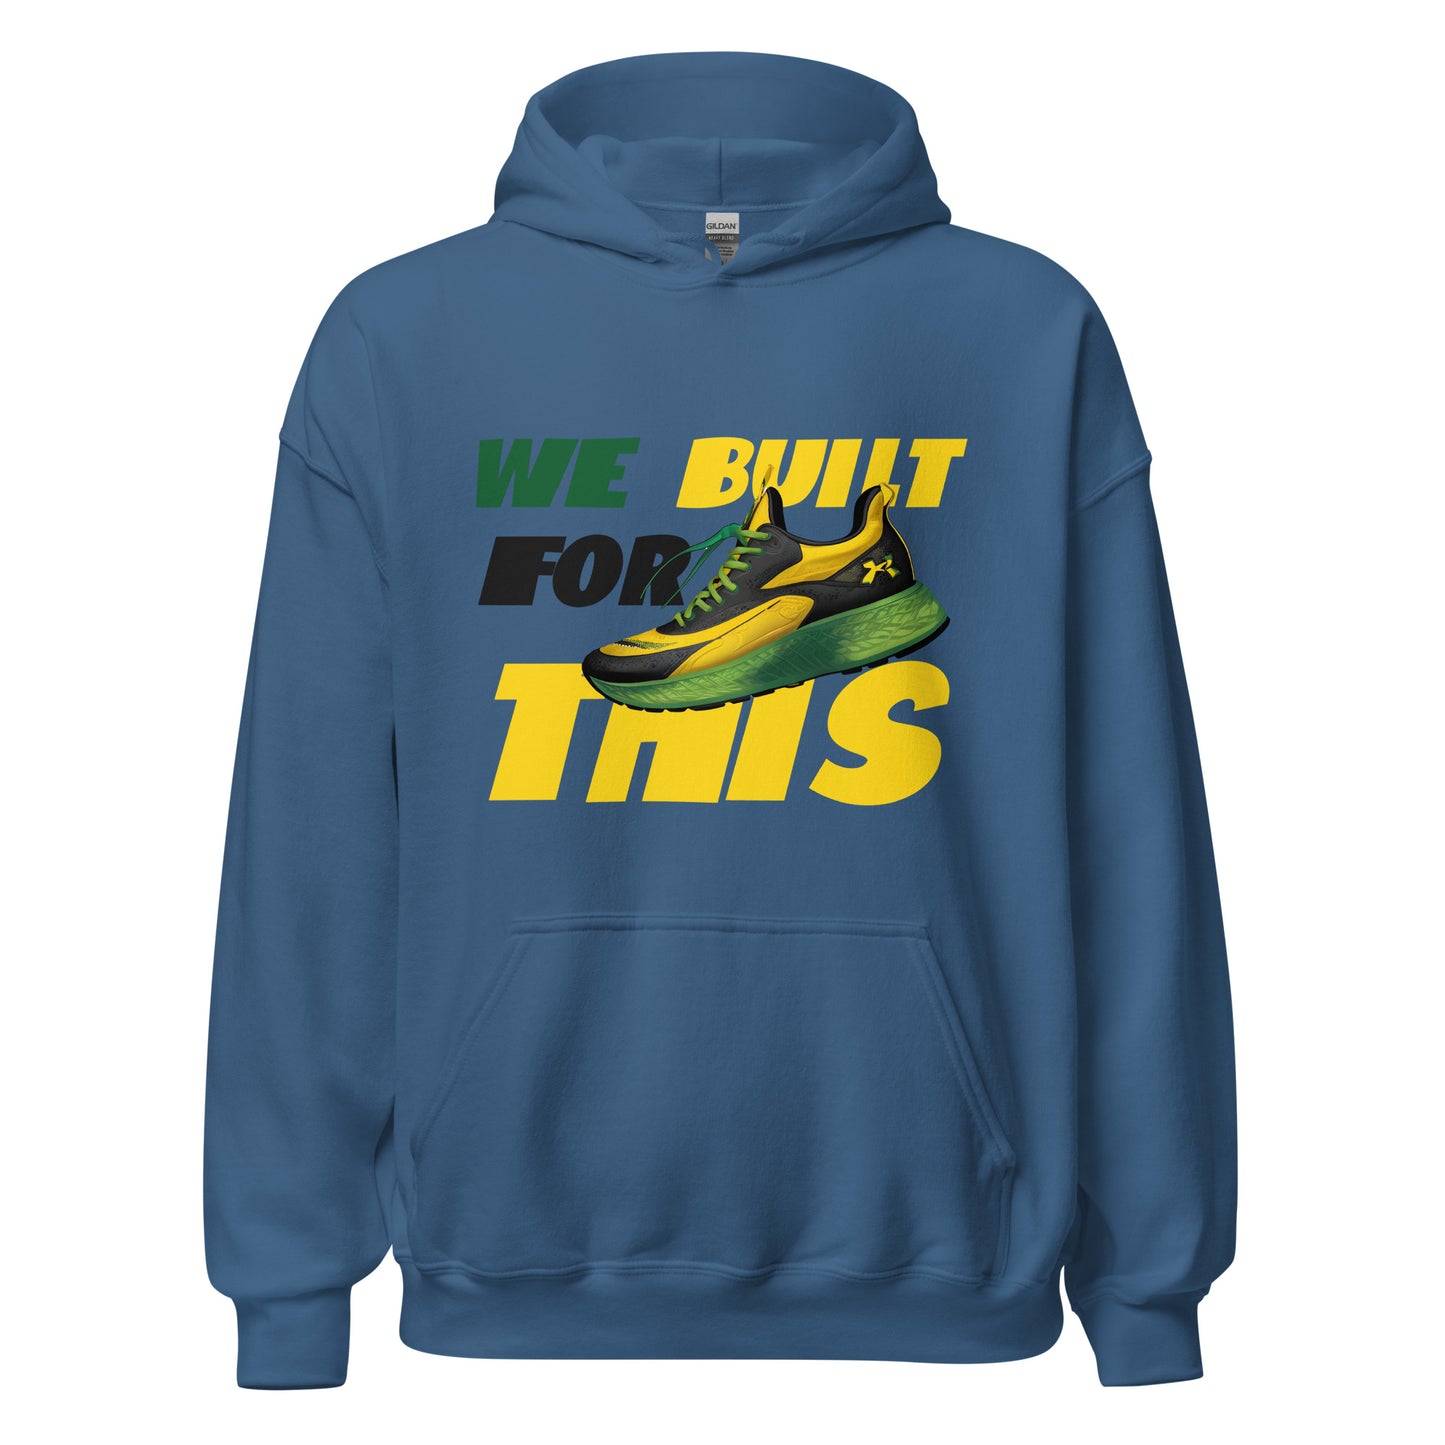 Unisex "Built For This" Hoodie